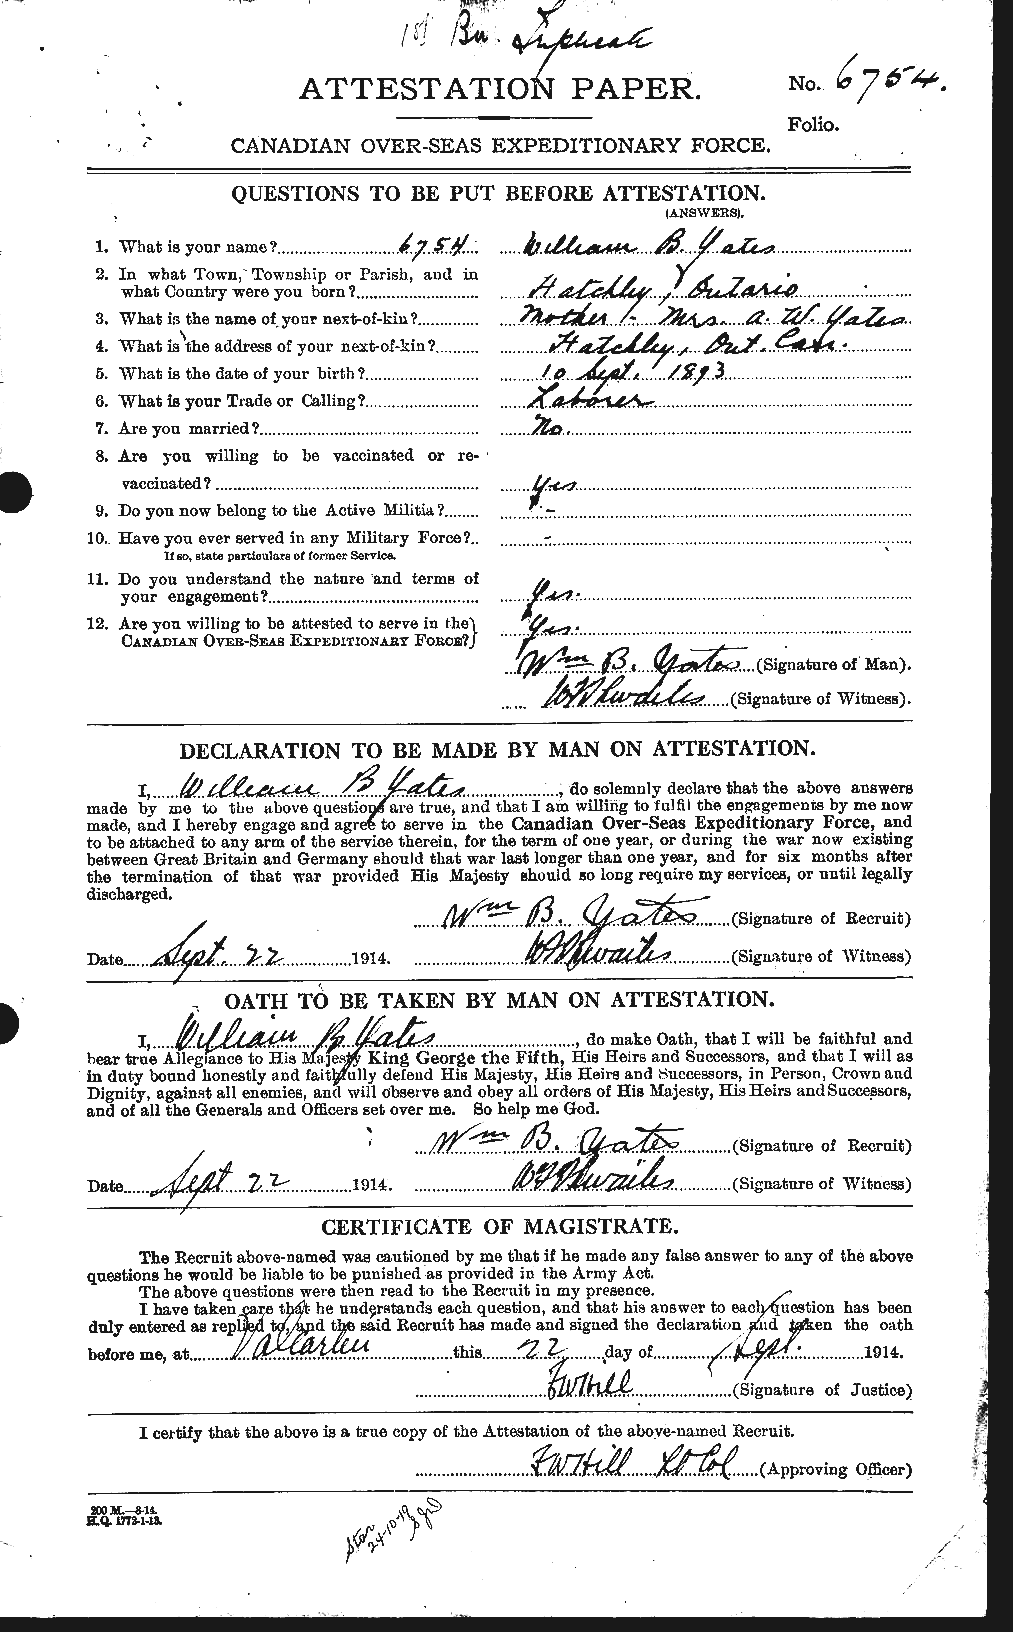 Personnel Records of the First World War - CEF 691324a